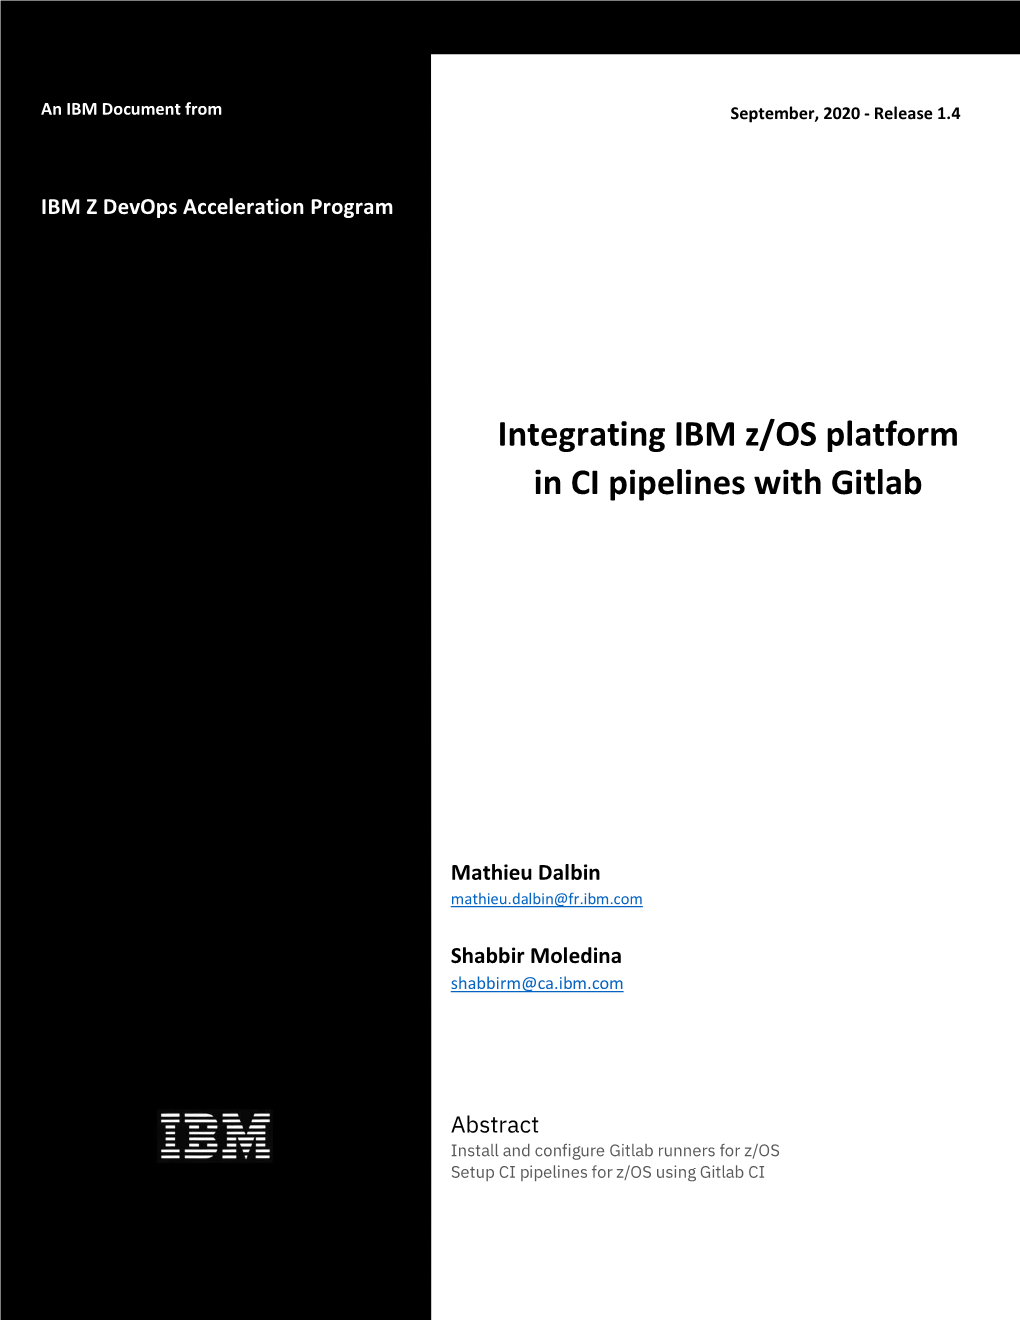 Integrating IBM Z/OS Platform in CI Pipelines with Gitlab Page 2 of 9 1 Introduction